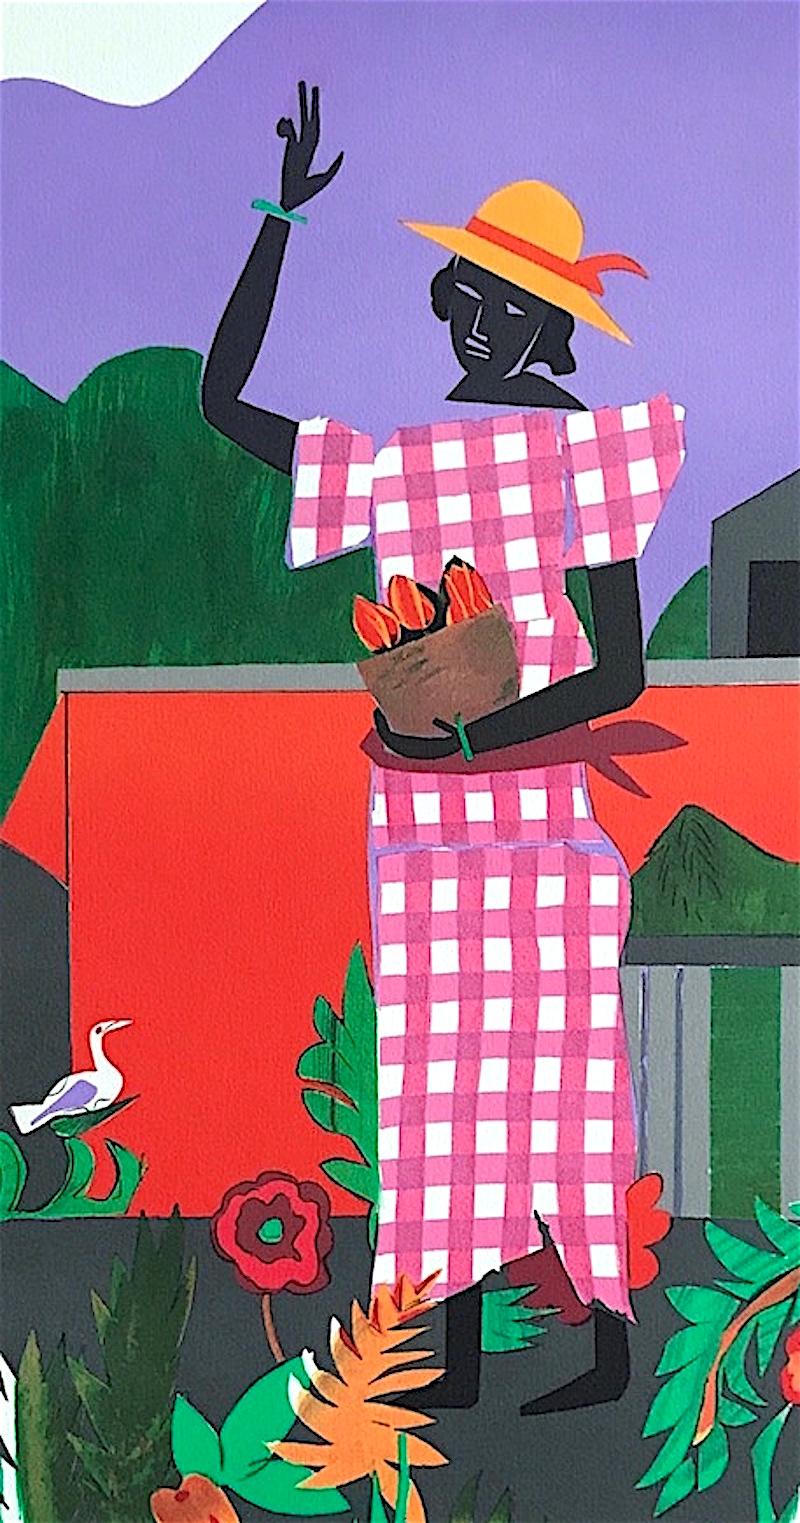 IN THE GARDEN Signed Lithograph, Black Woman Pink Gingham Dress Collage Portrait - Print by Romare Bearden